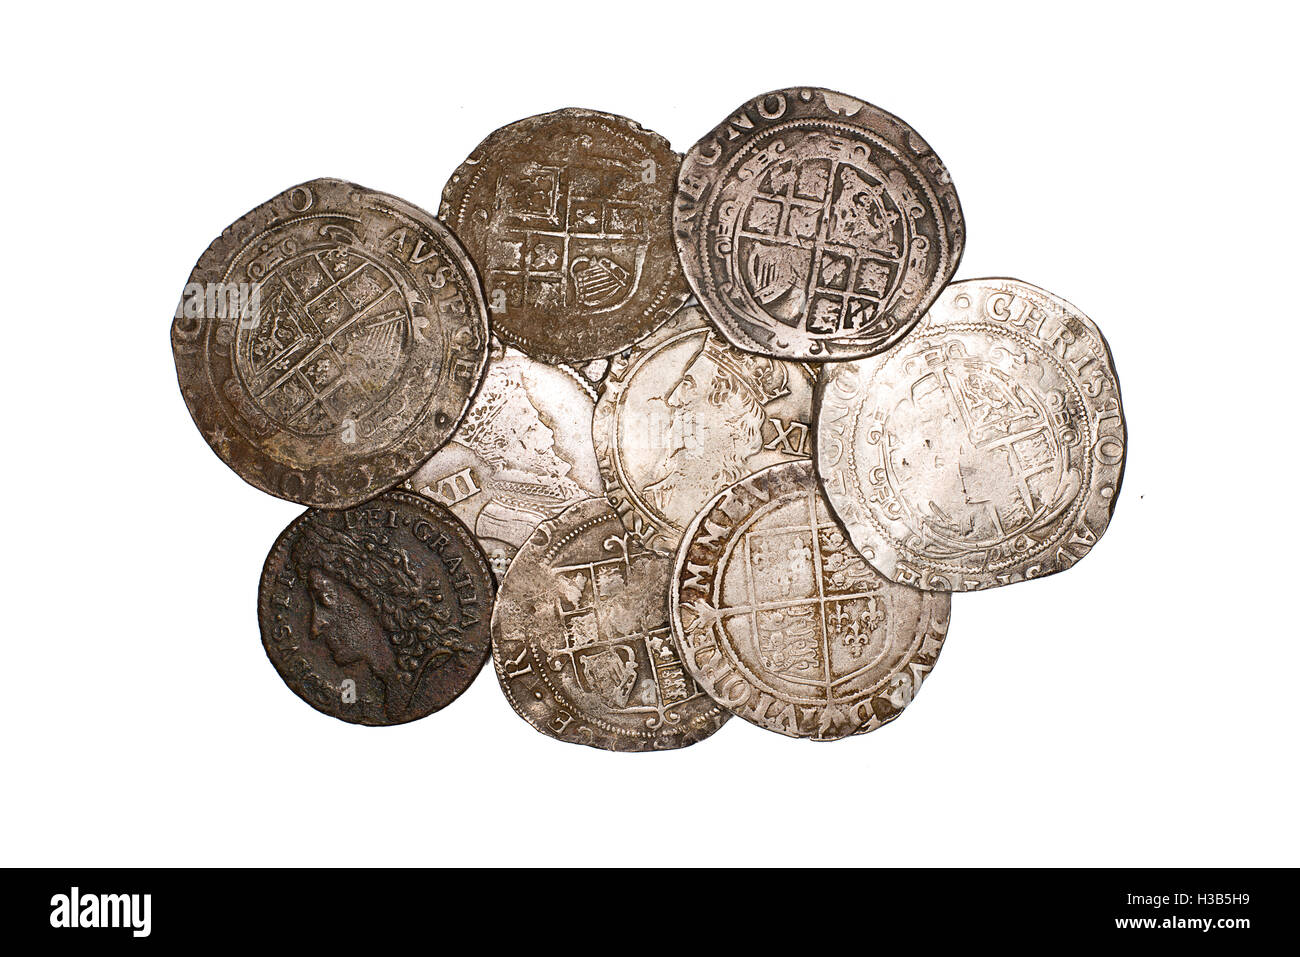 Many ancient silver coins on white Stock Photo